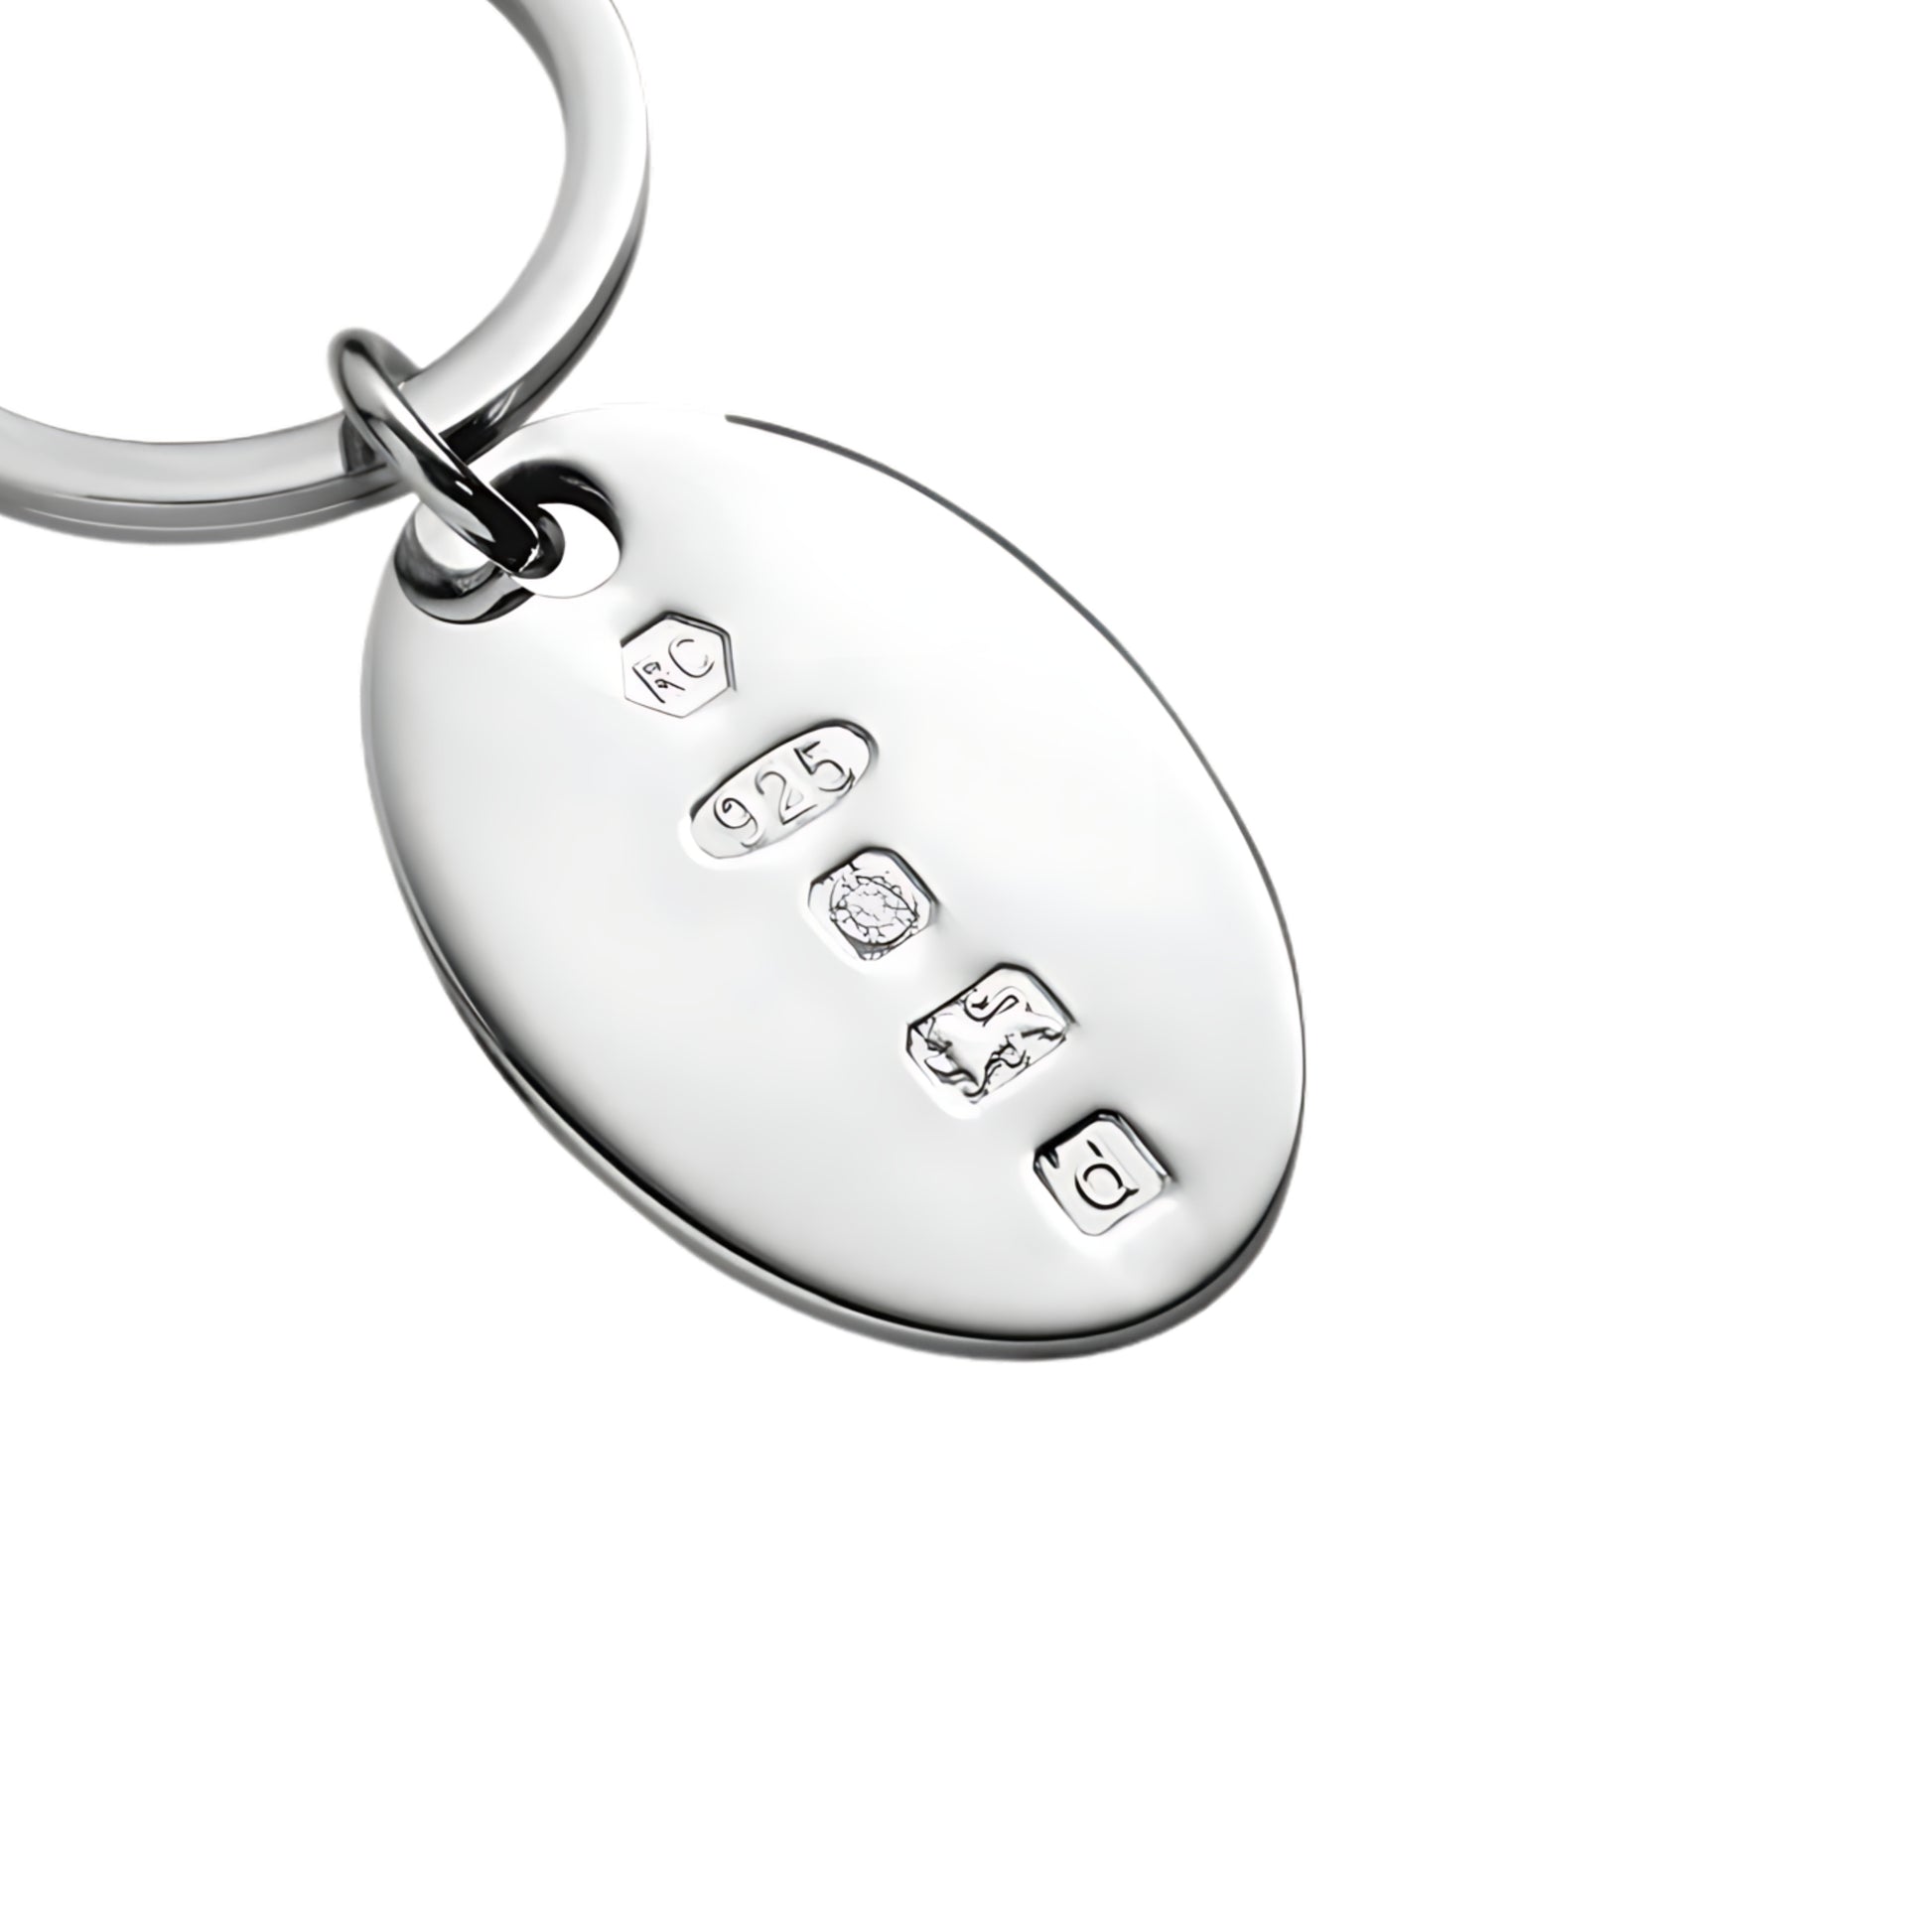 Carrs Silver Sterling Silver Hallmarked Oval Key Fob Lifestyle